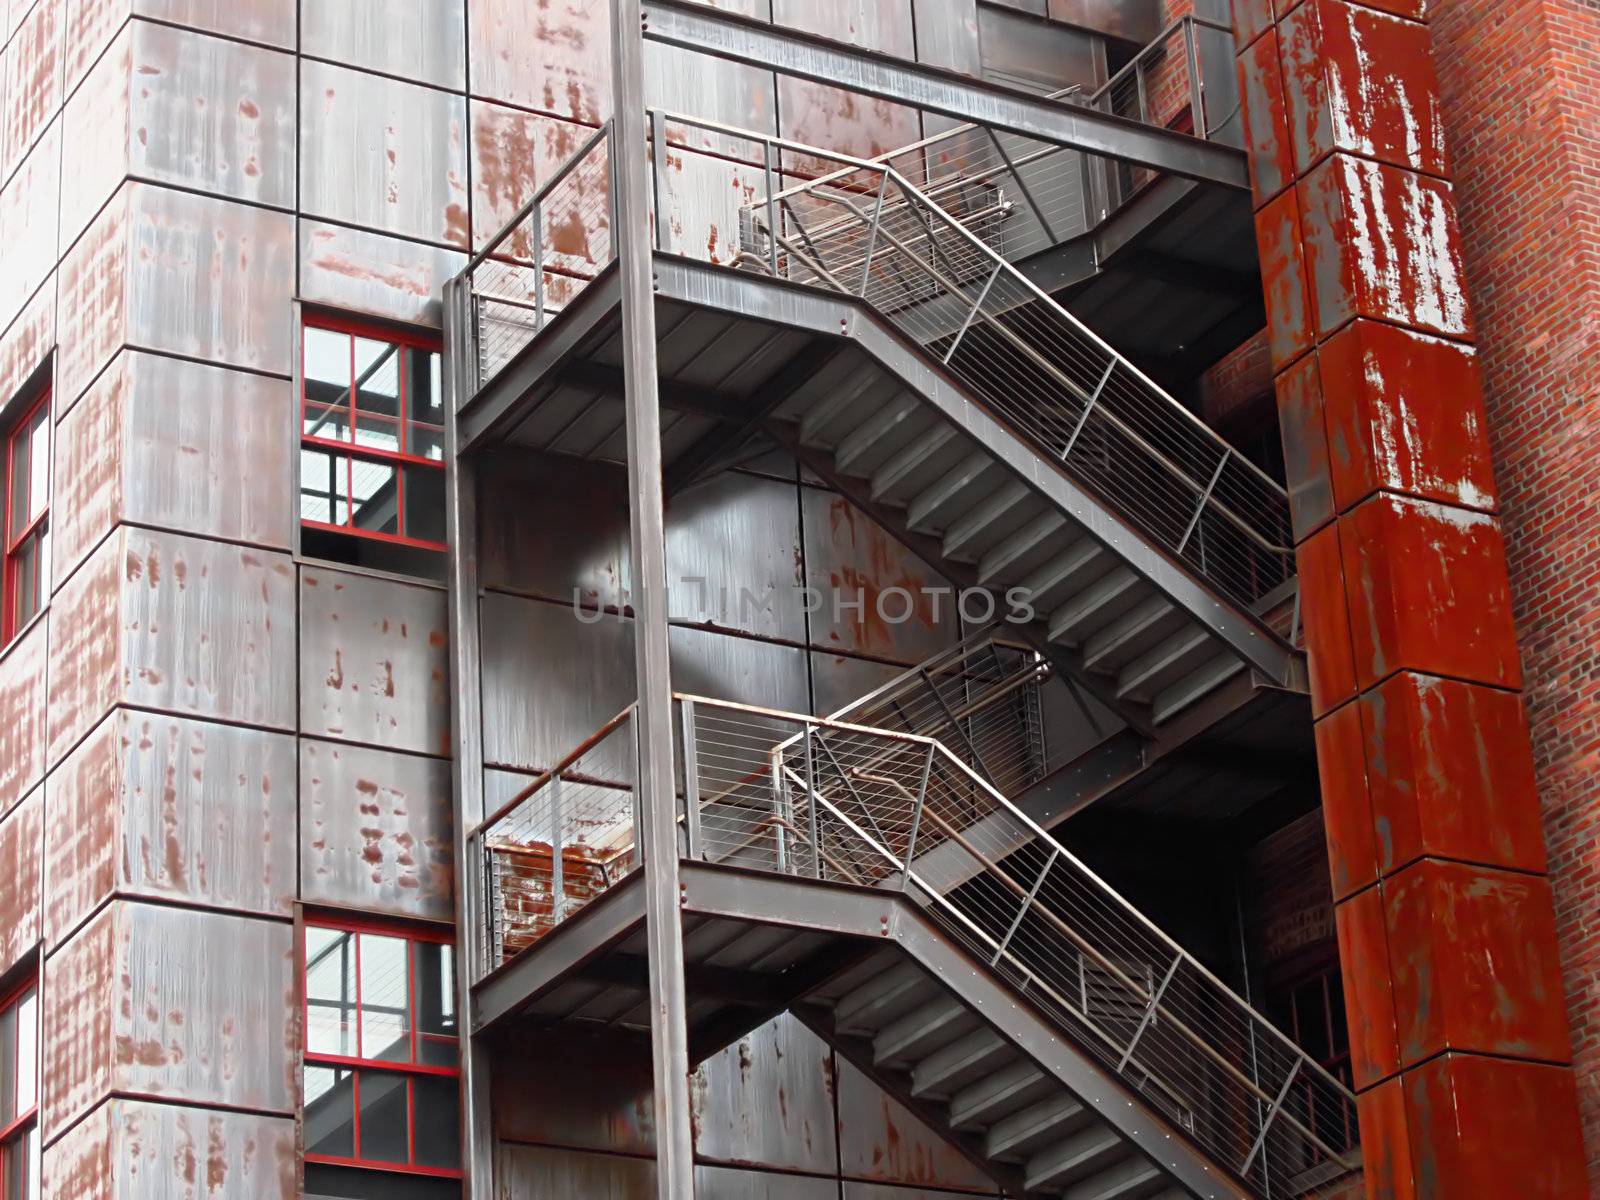 A photograph of an outside staircase detailing its unique architectural design.